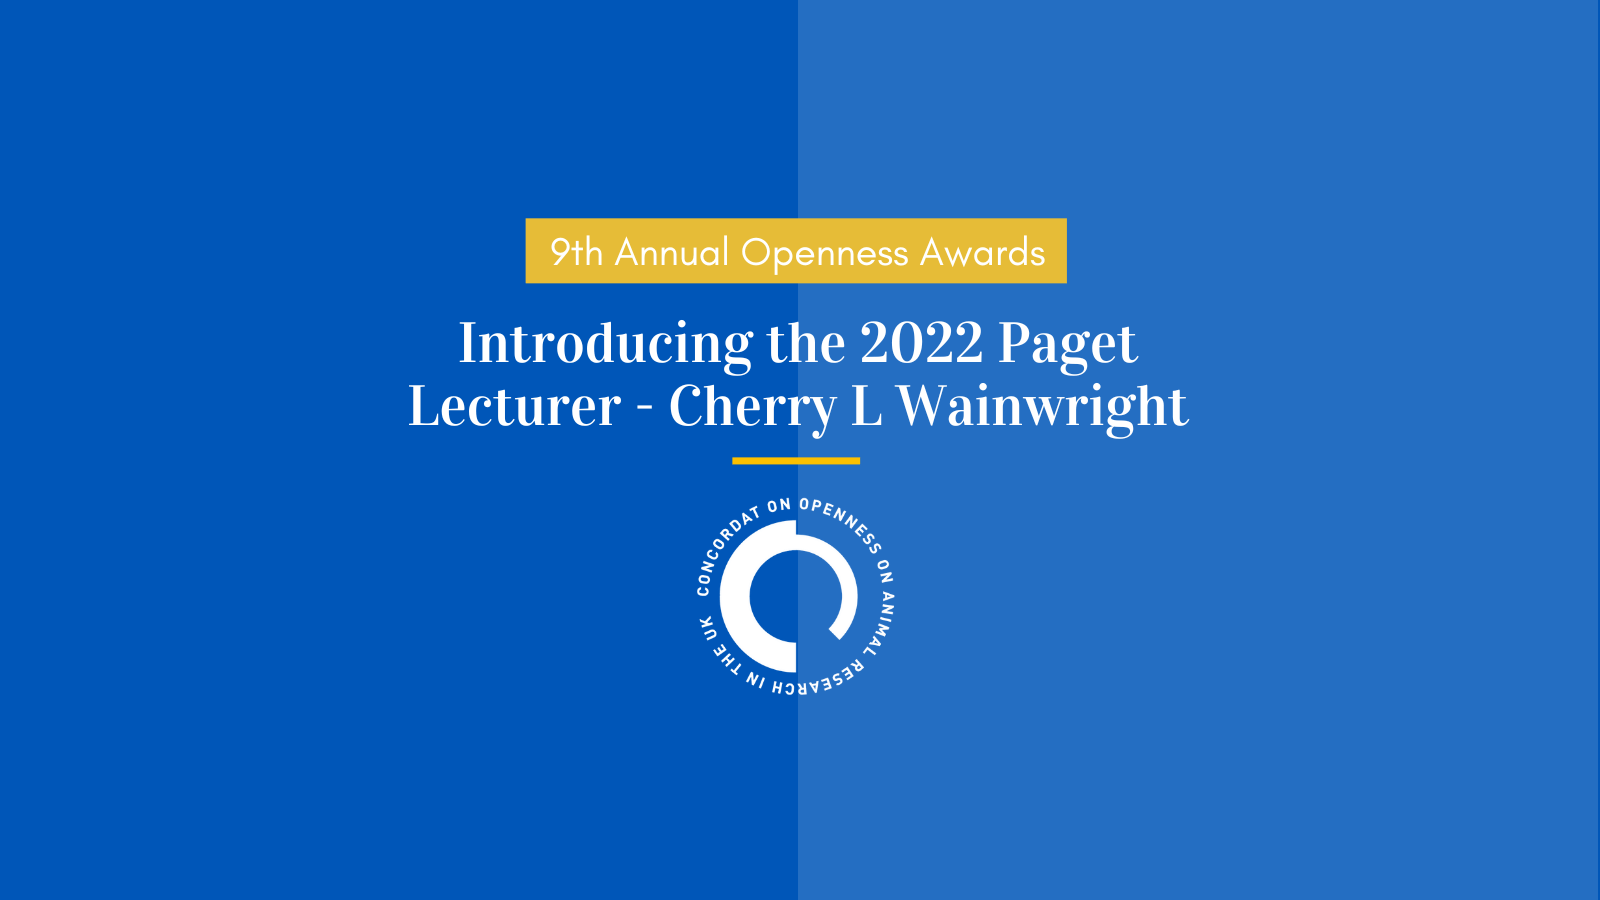 Introducing the 2022 Paget Lecturer